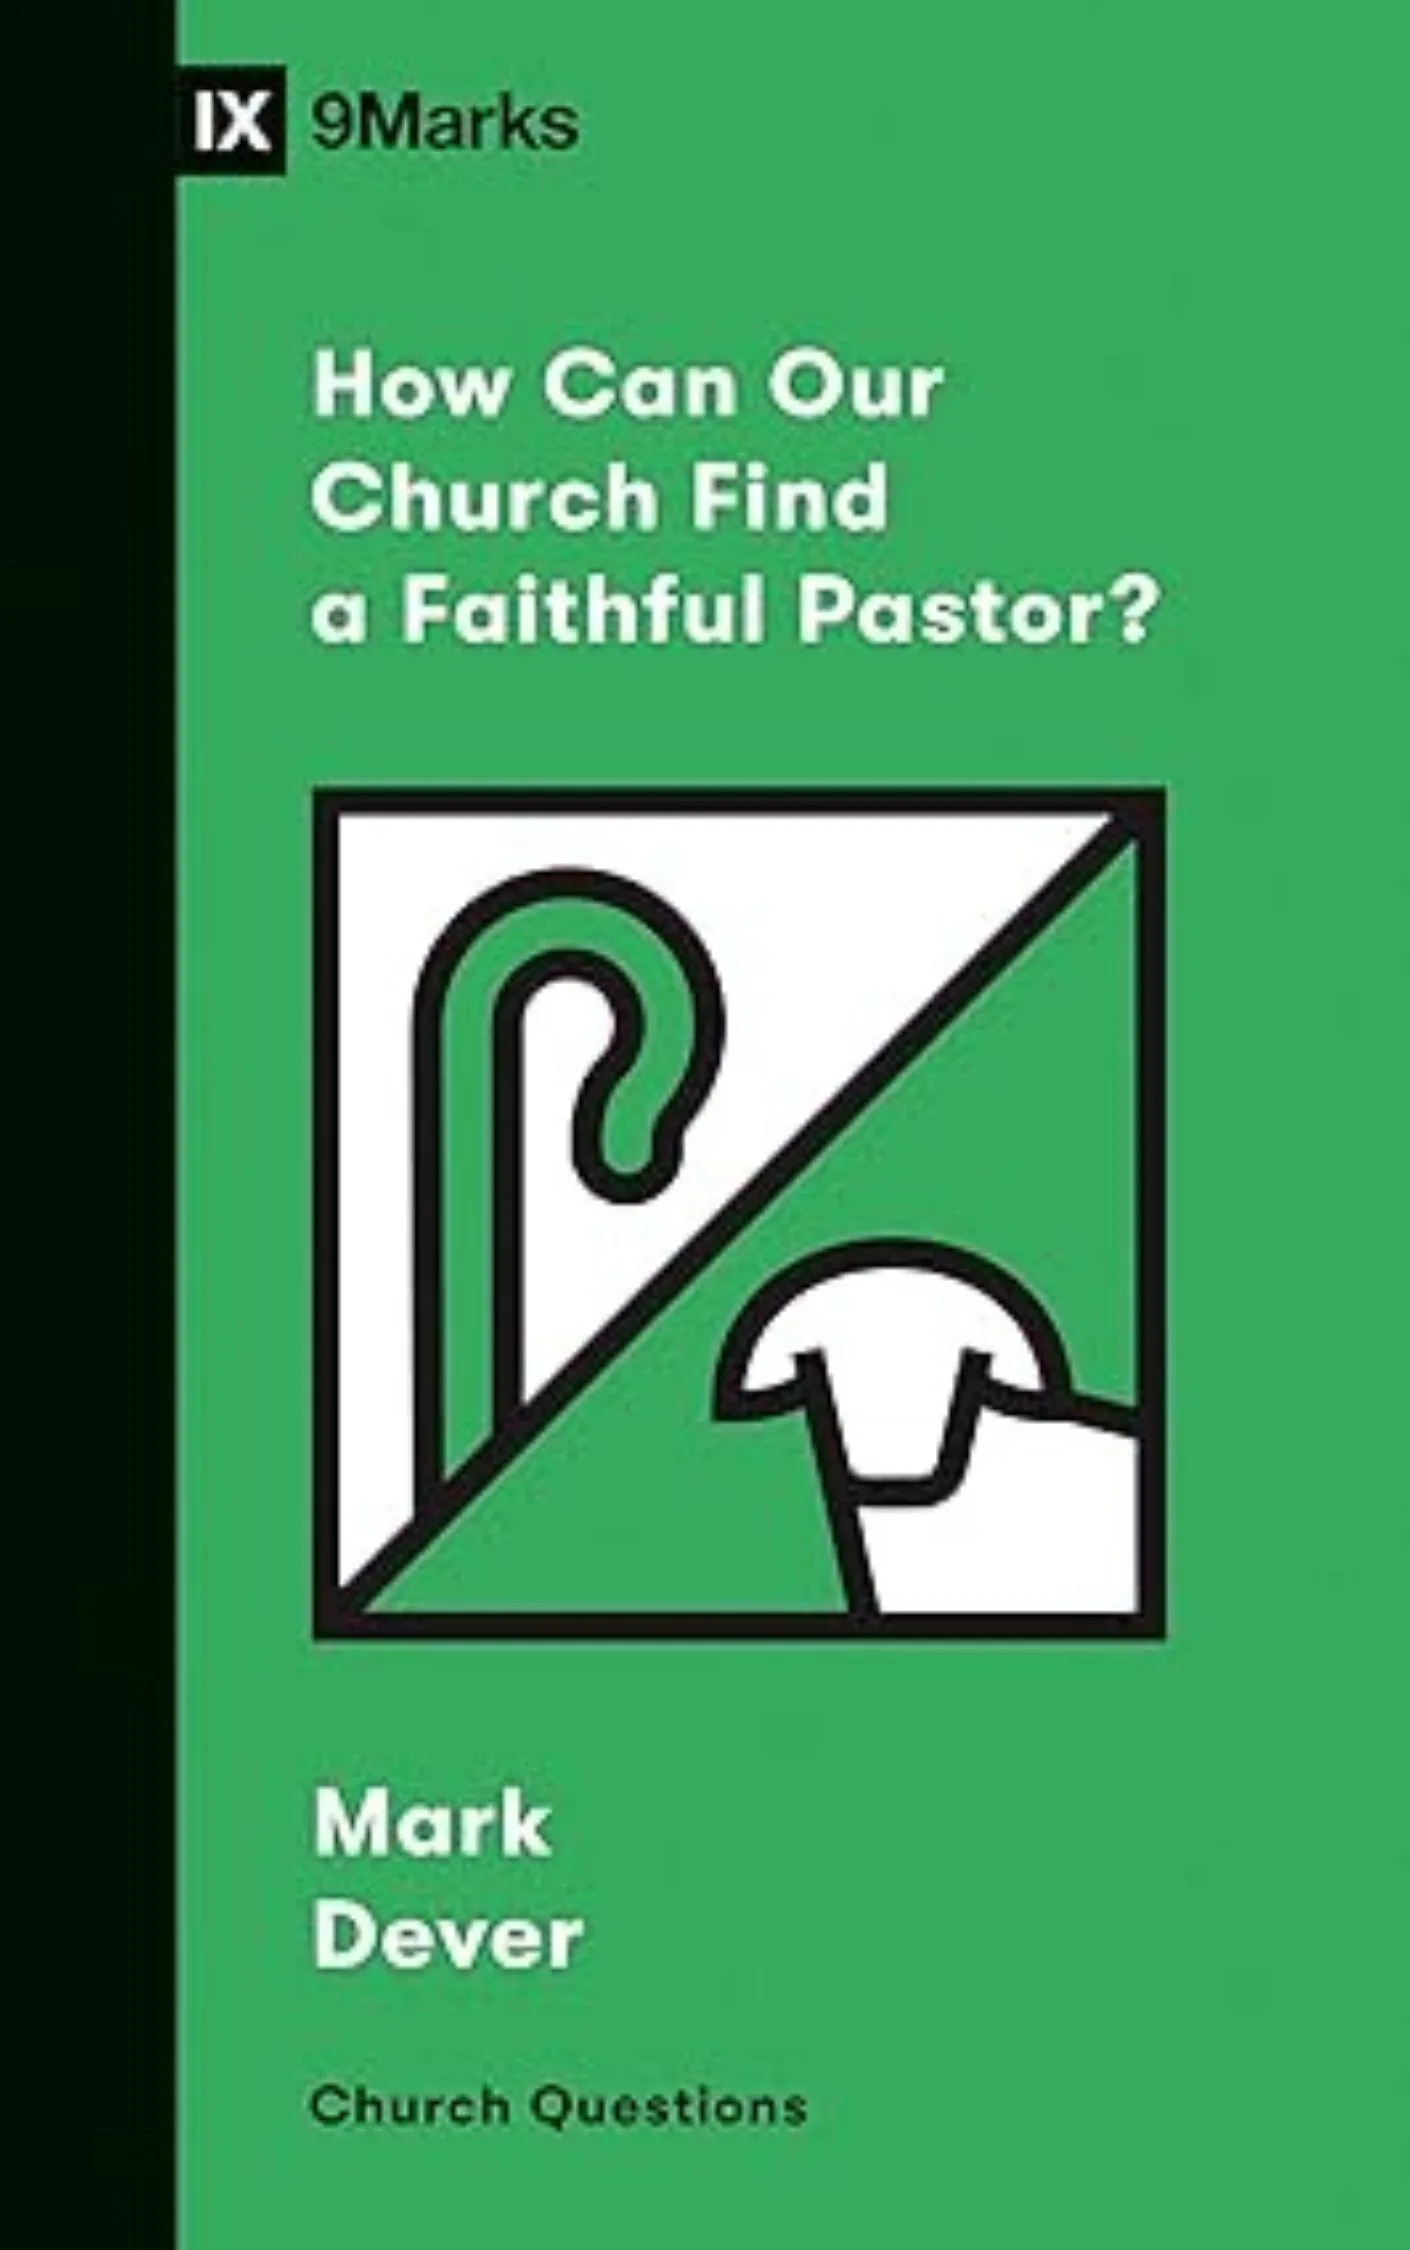 How Can Our Church Find a Faithful Pastor by Mark Dever